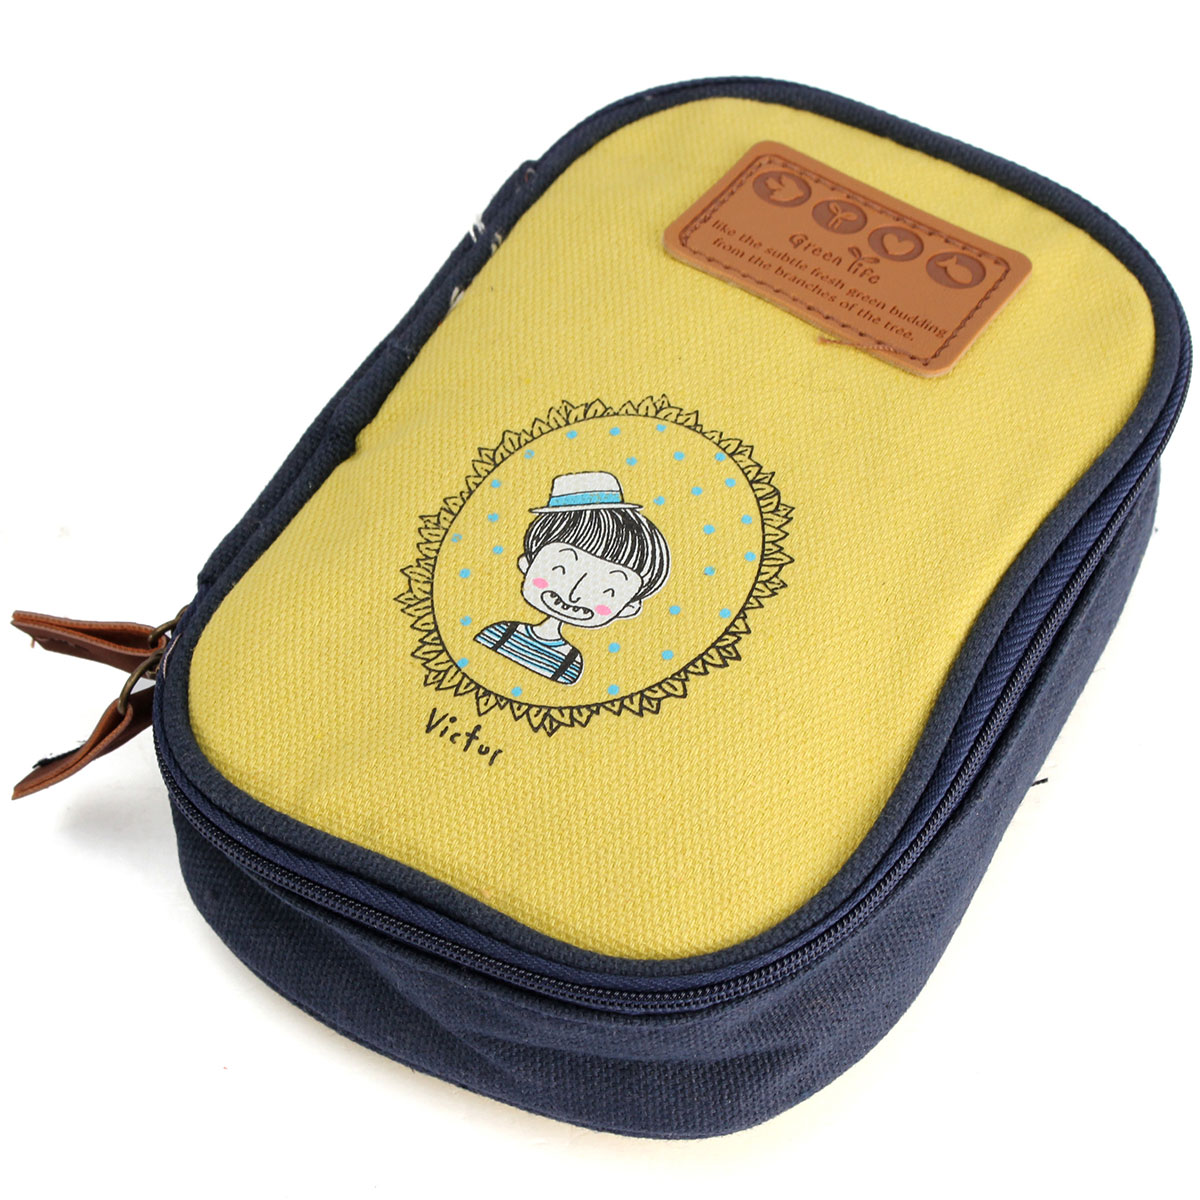 Childhood-Memory-Pencil-Case-Time-Canvas-Coin-Purse-Cosmetic-Bag-Double-Zipper-Storage-Bag-Multifunc-1558124-7